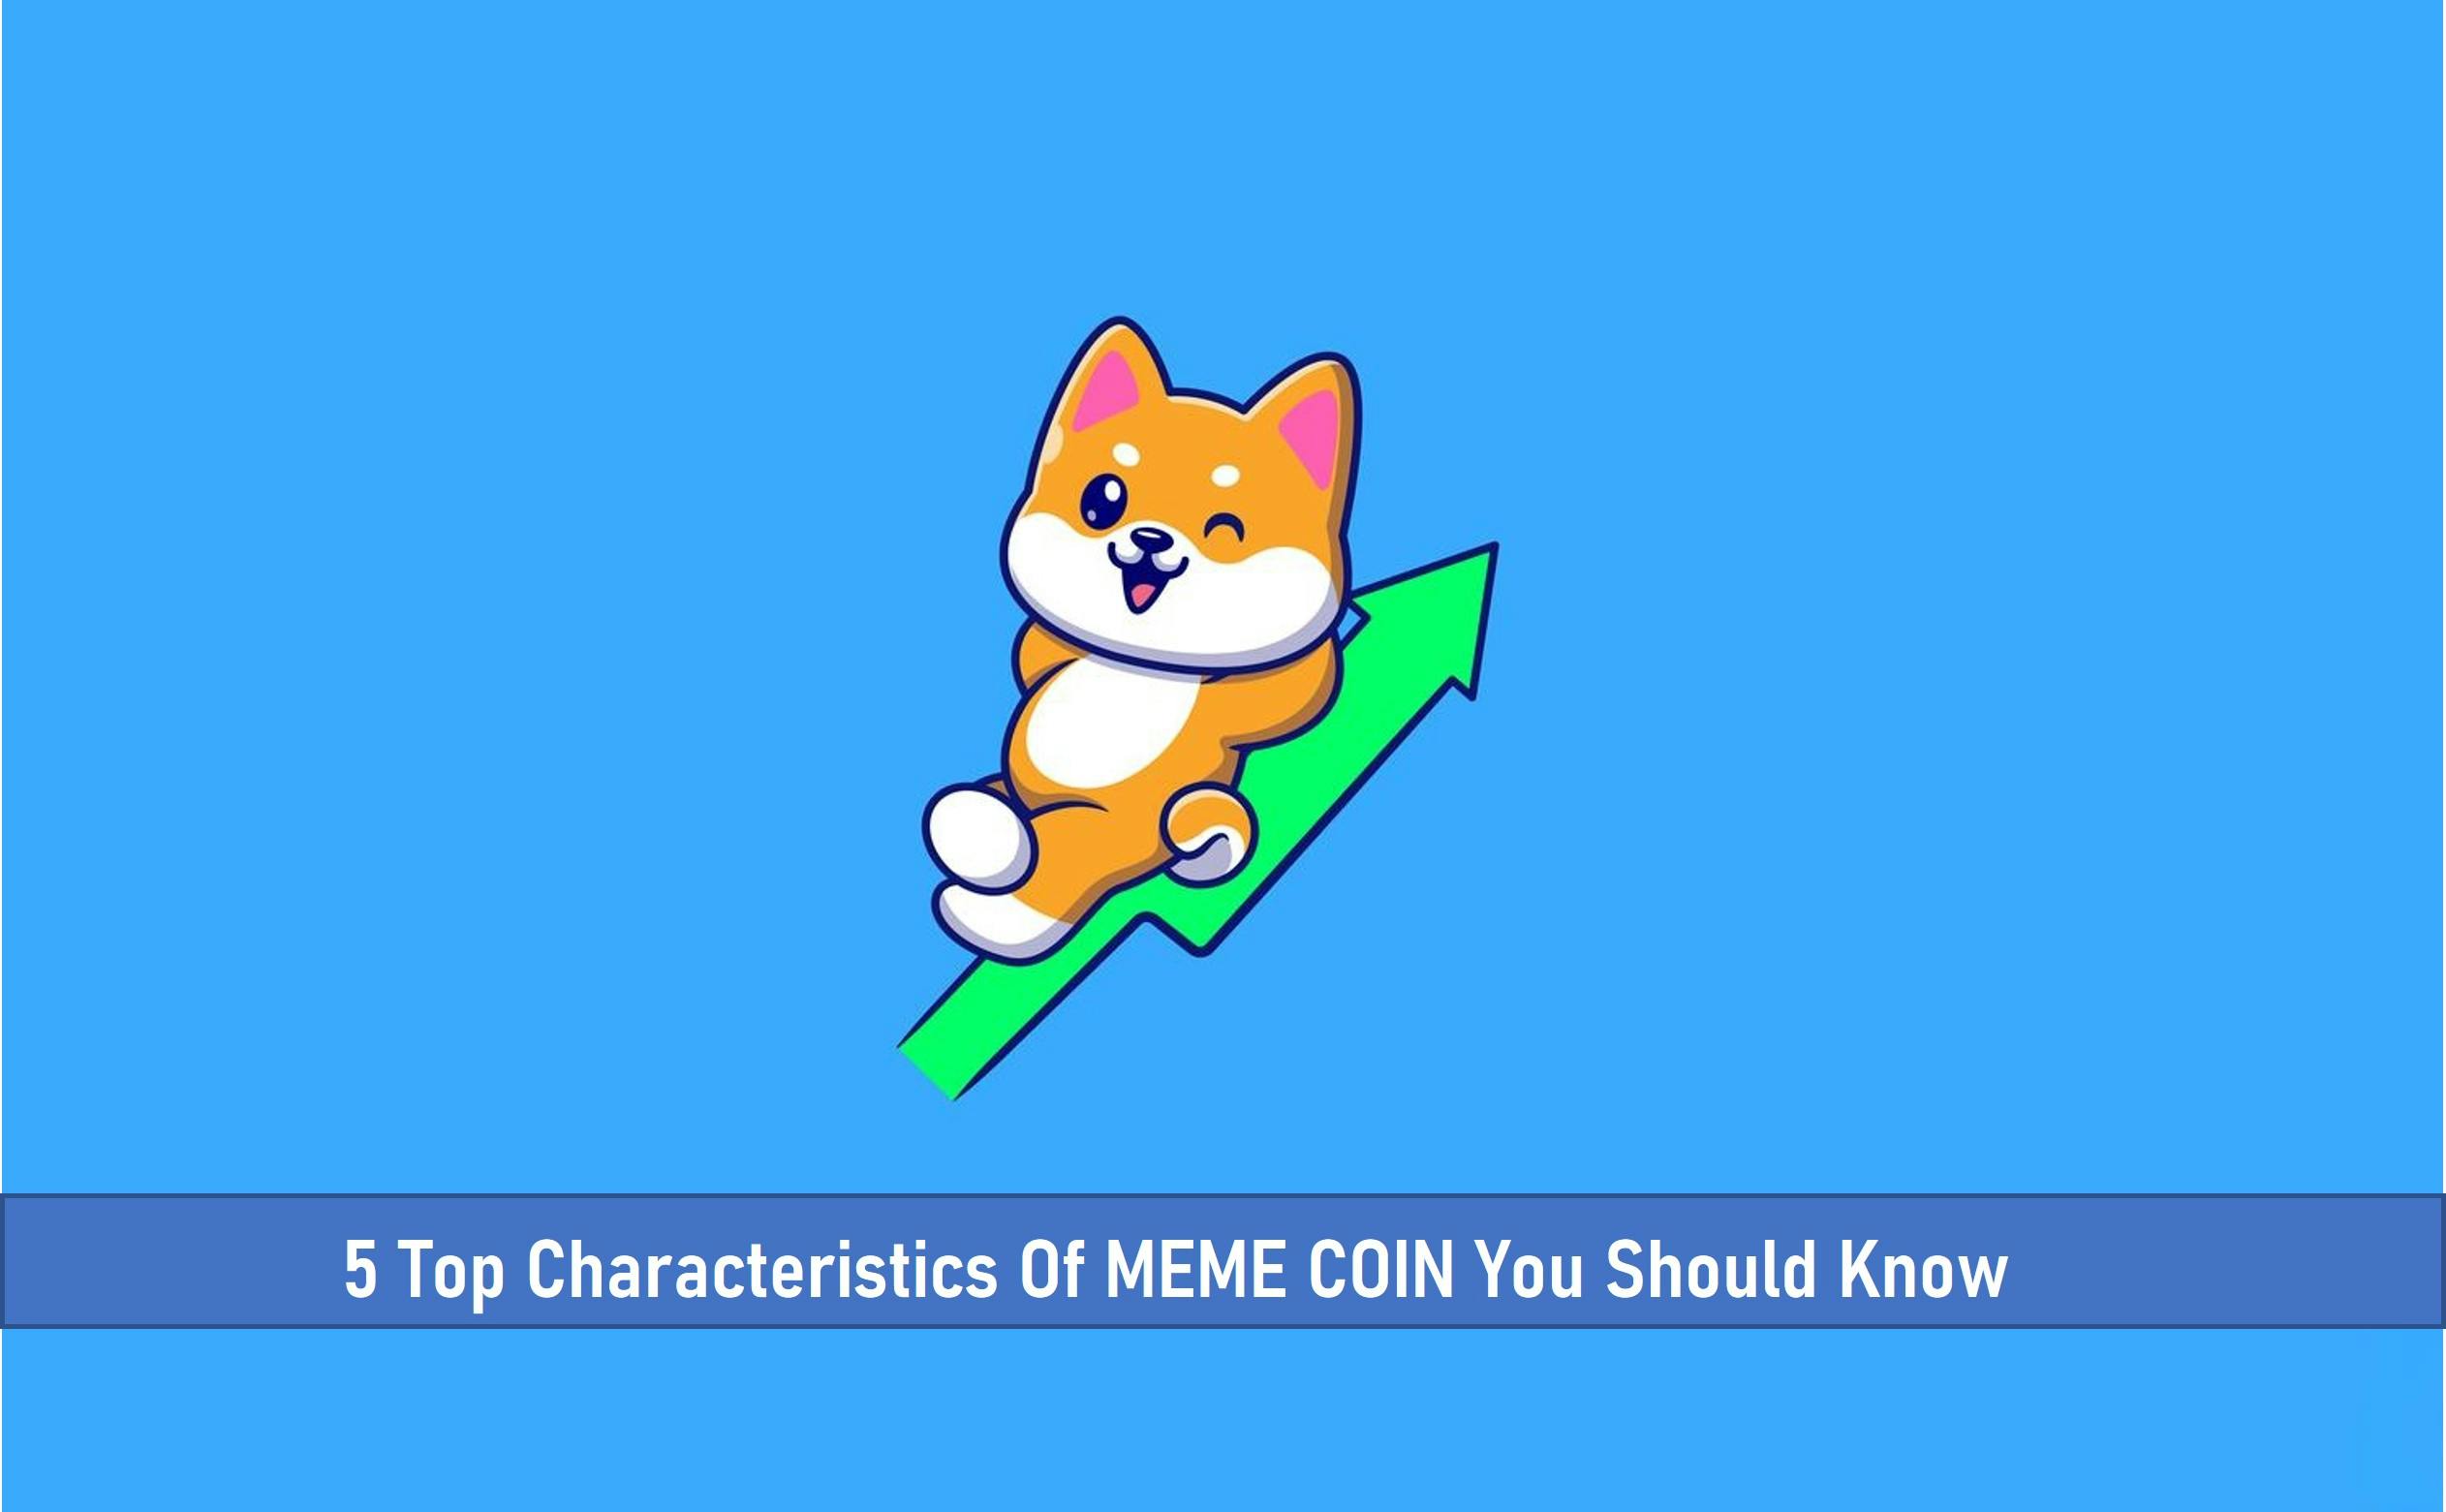 5 Characteristics of Meme Coins You Should Know